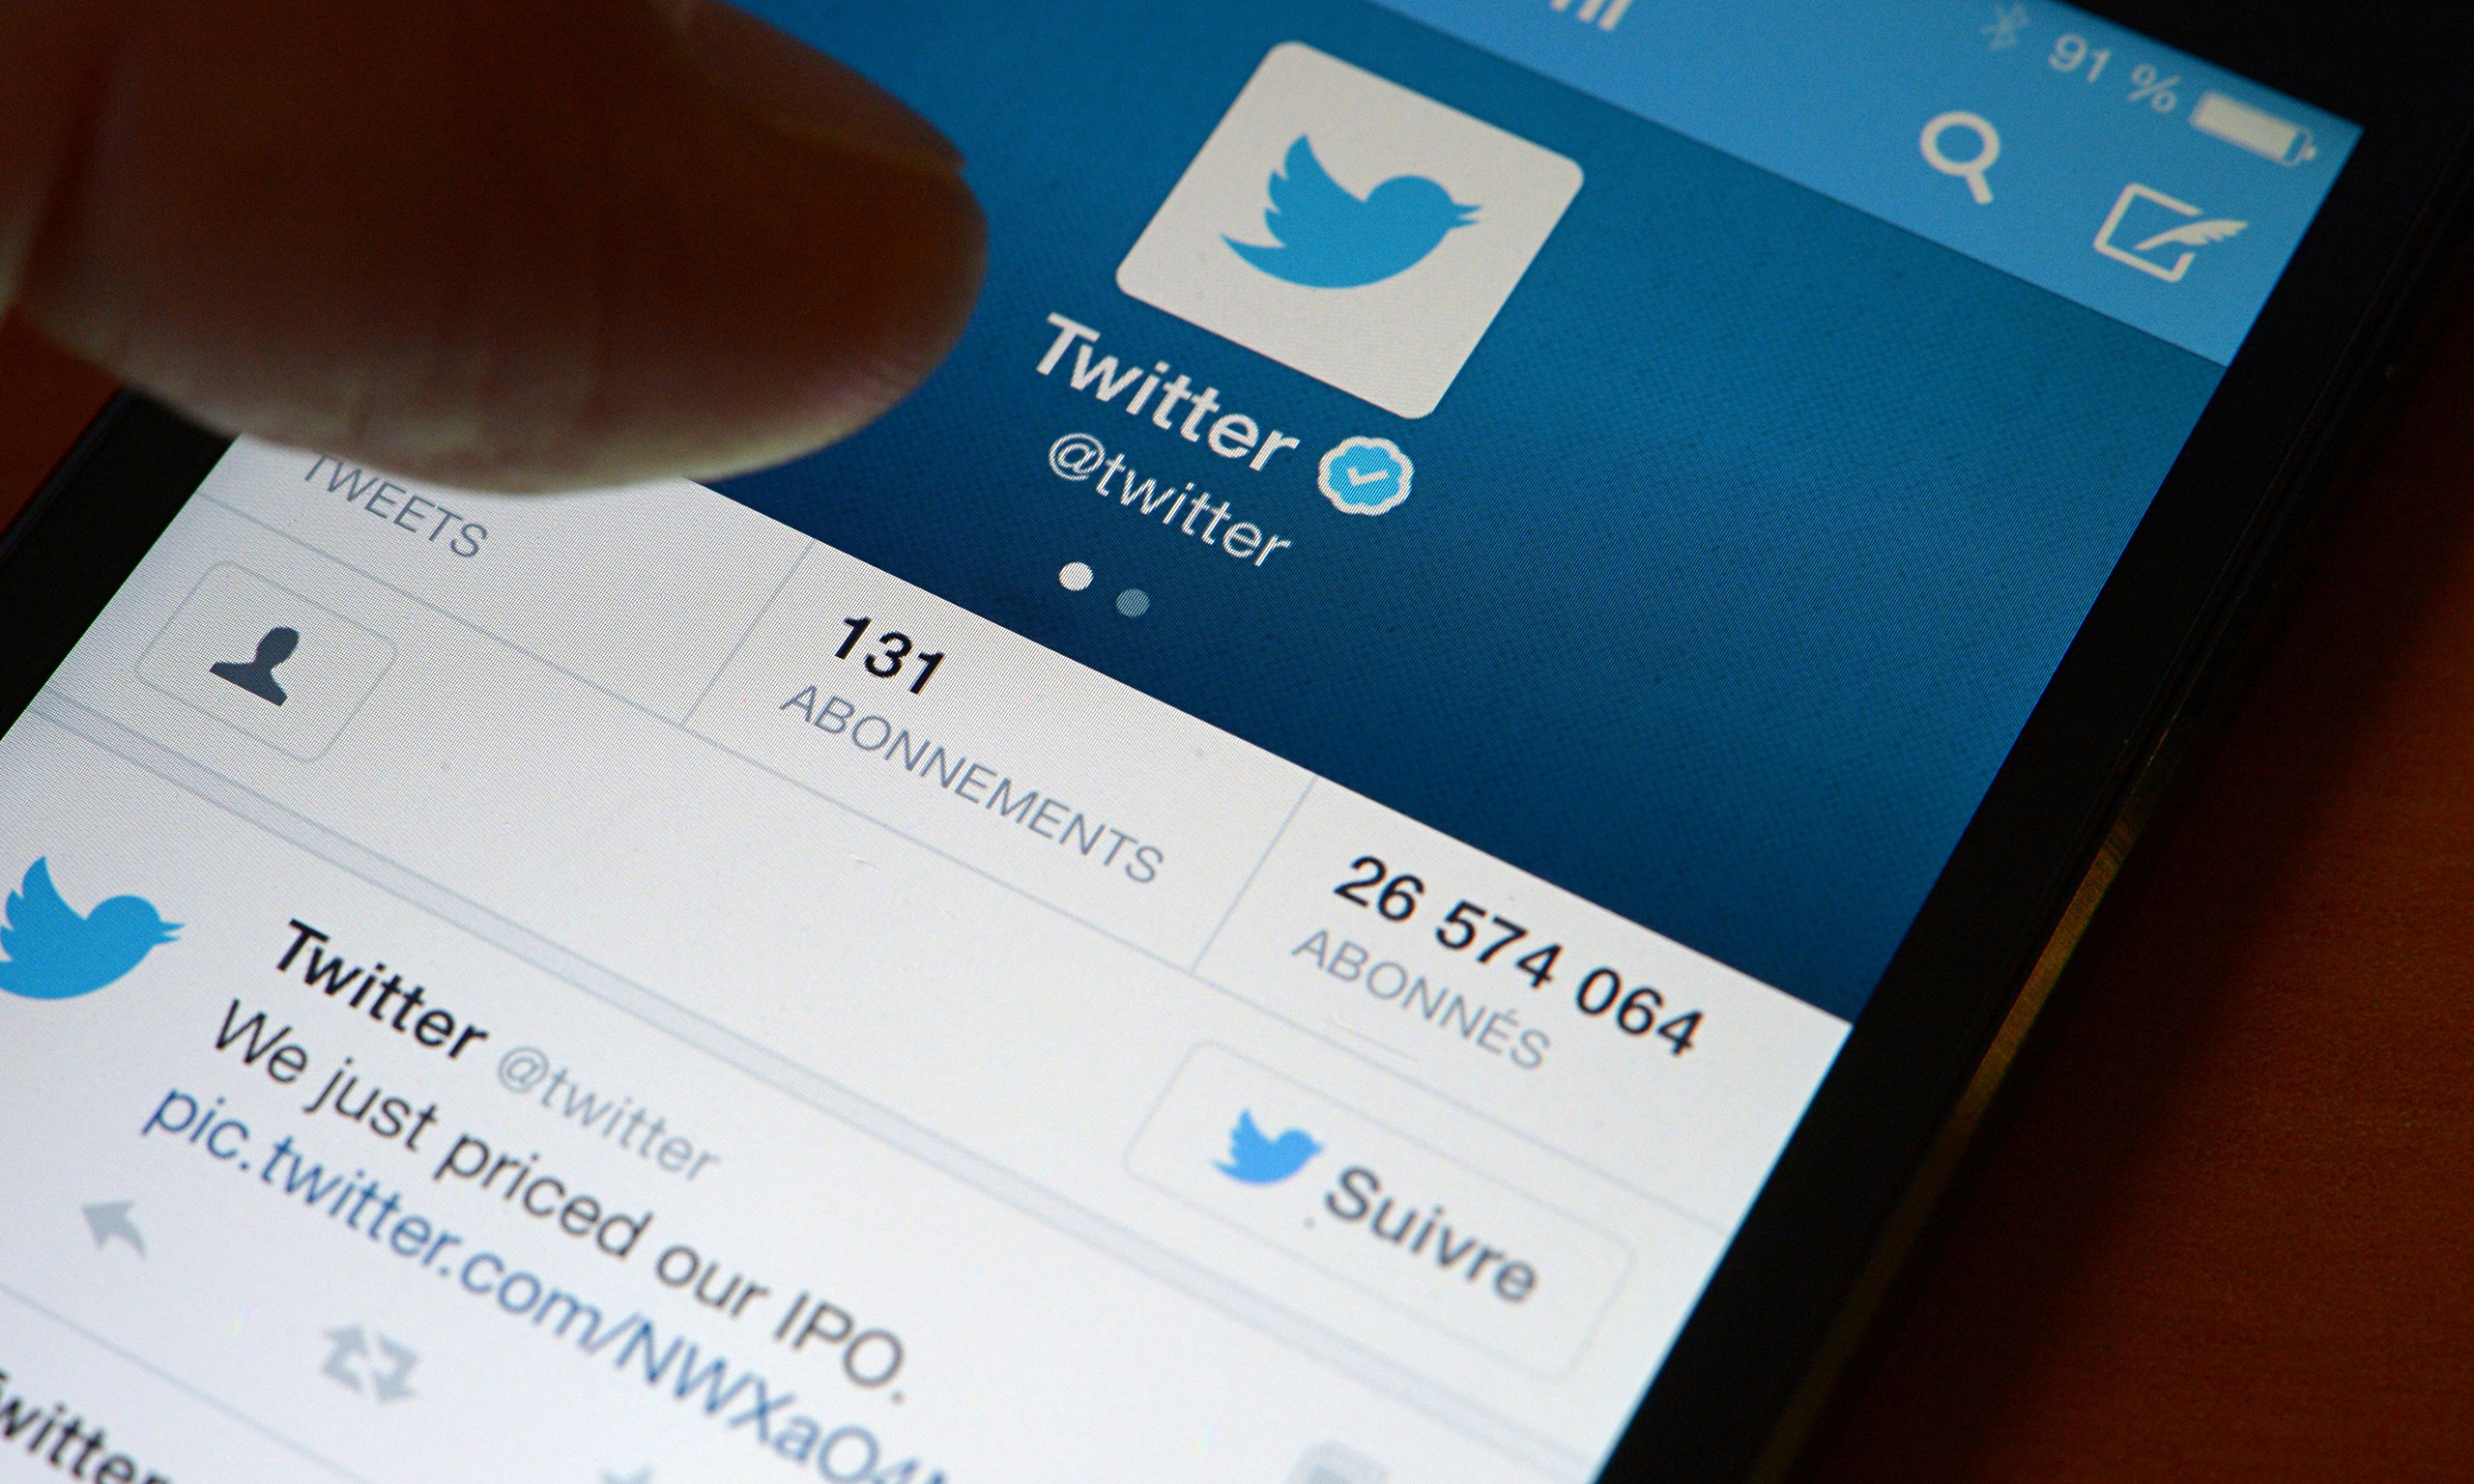 Twitter in France on day company launched